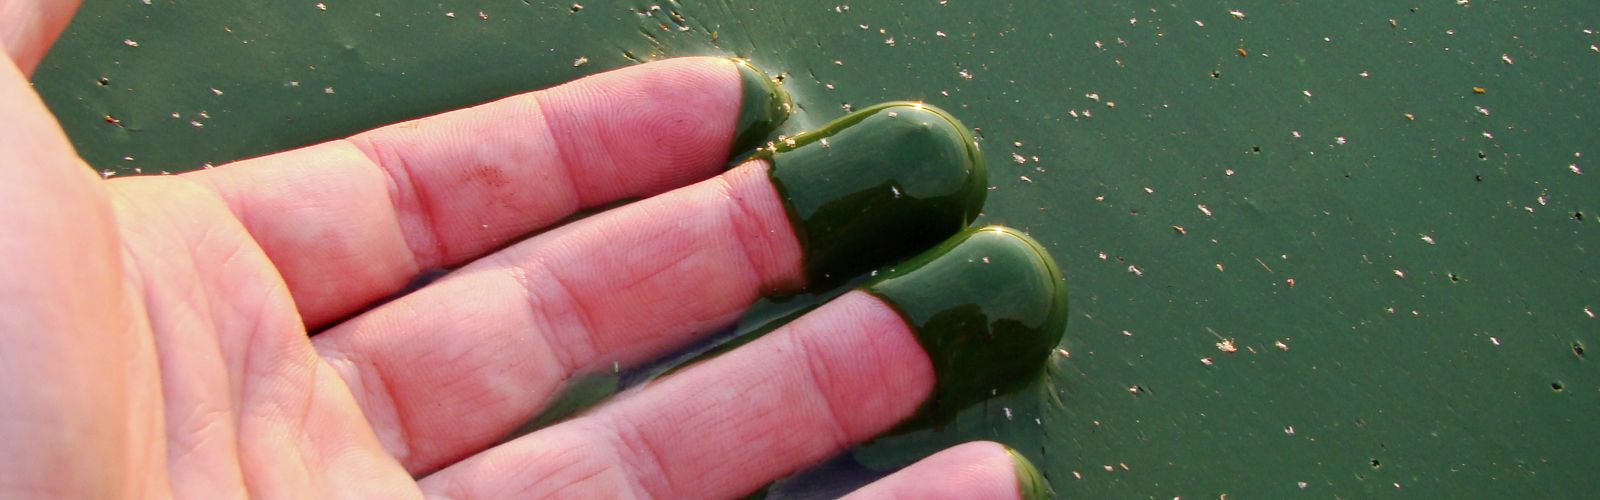 An open palm dipping fingertips in green sludge producing green fingers.